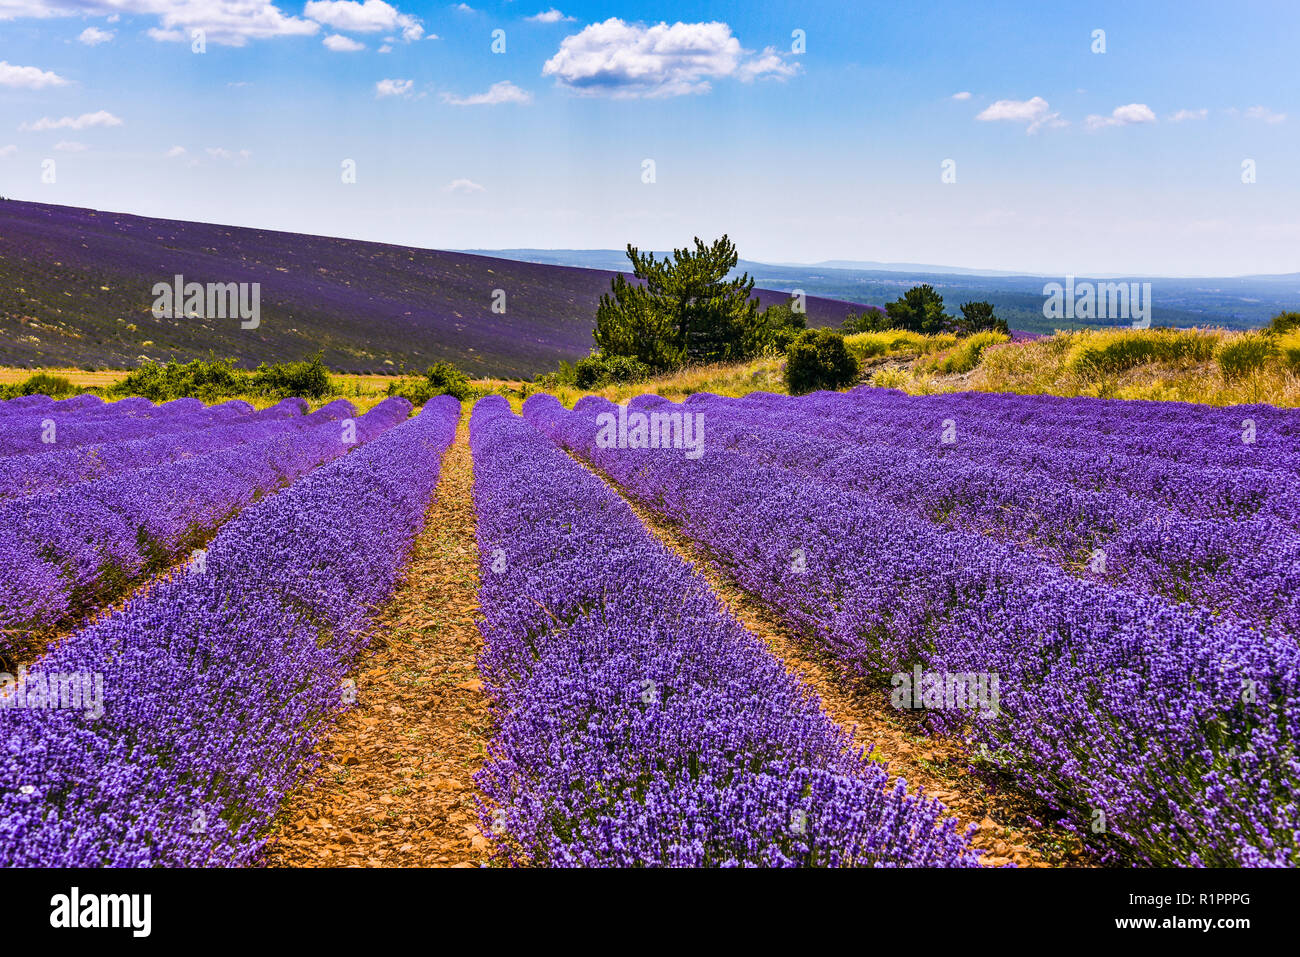 lavender fields in full bloom, Ferrassières, Provence, France Stock Photo